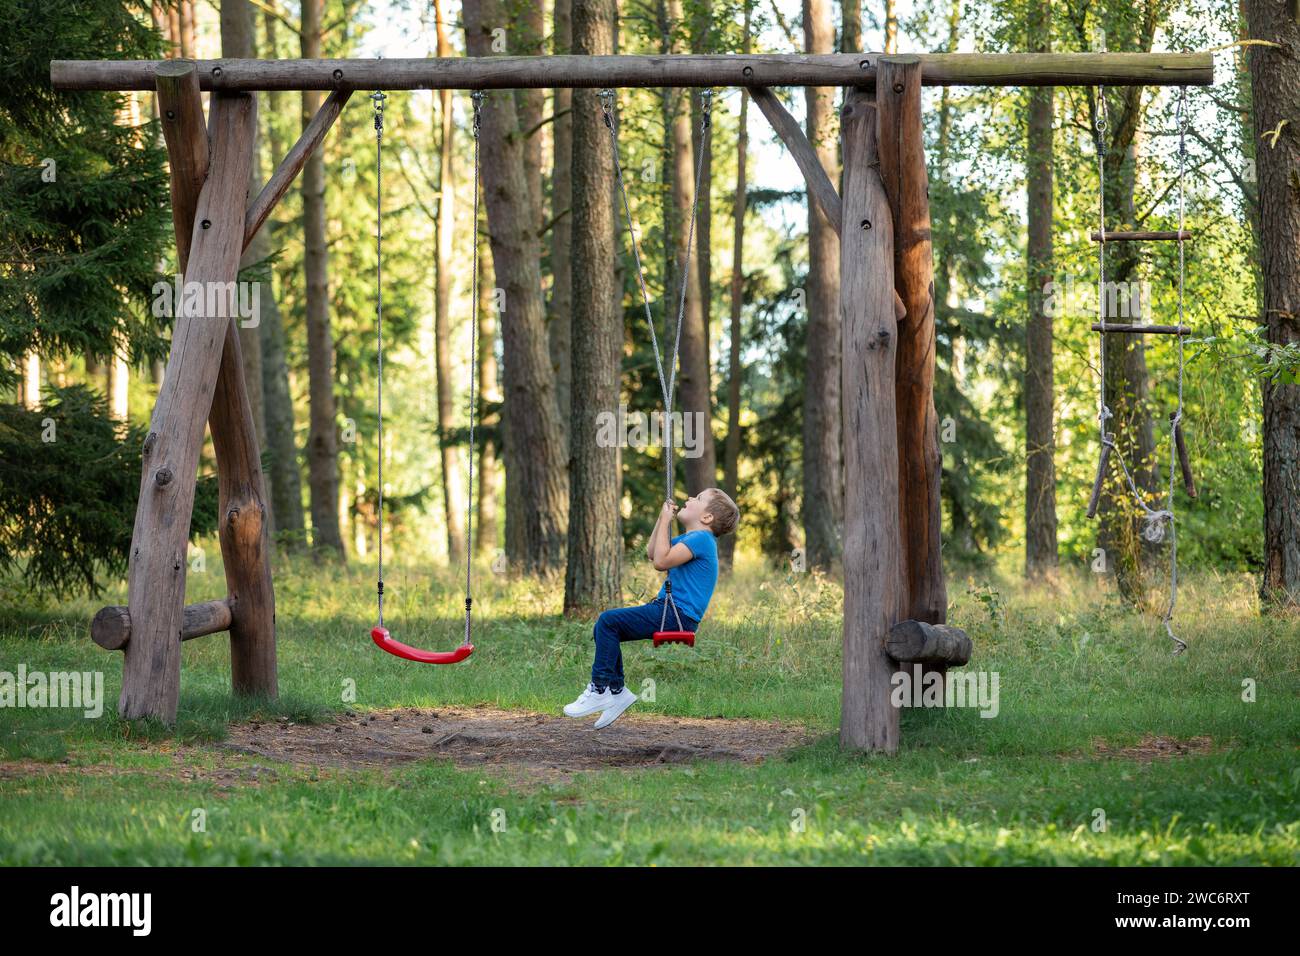 A little boy sits on a large rope swing in a sunny forest. The child plays with the ropes, twisting them and then quickly spins around its axis. Stock Photo